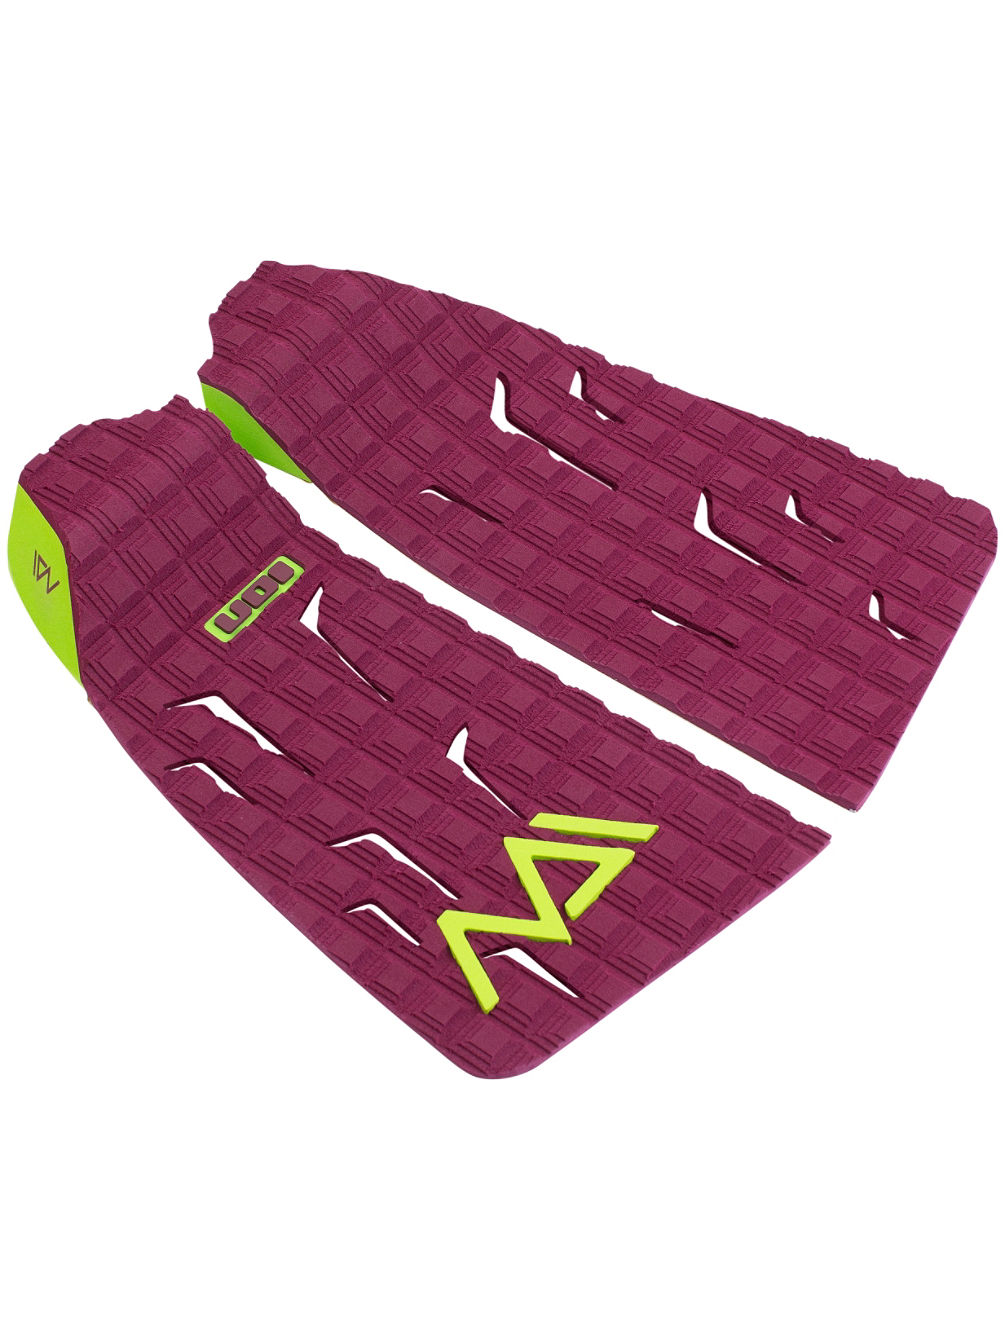 Maiden (2Pcs) Traction Pad